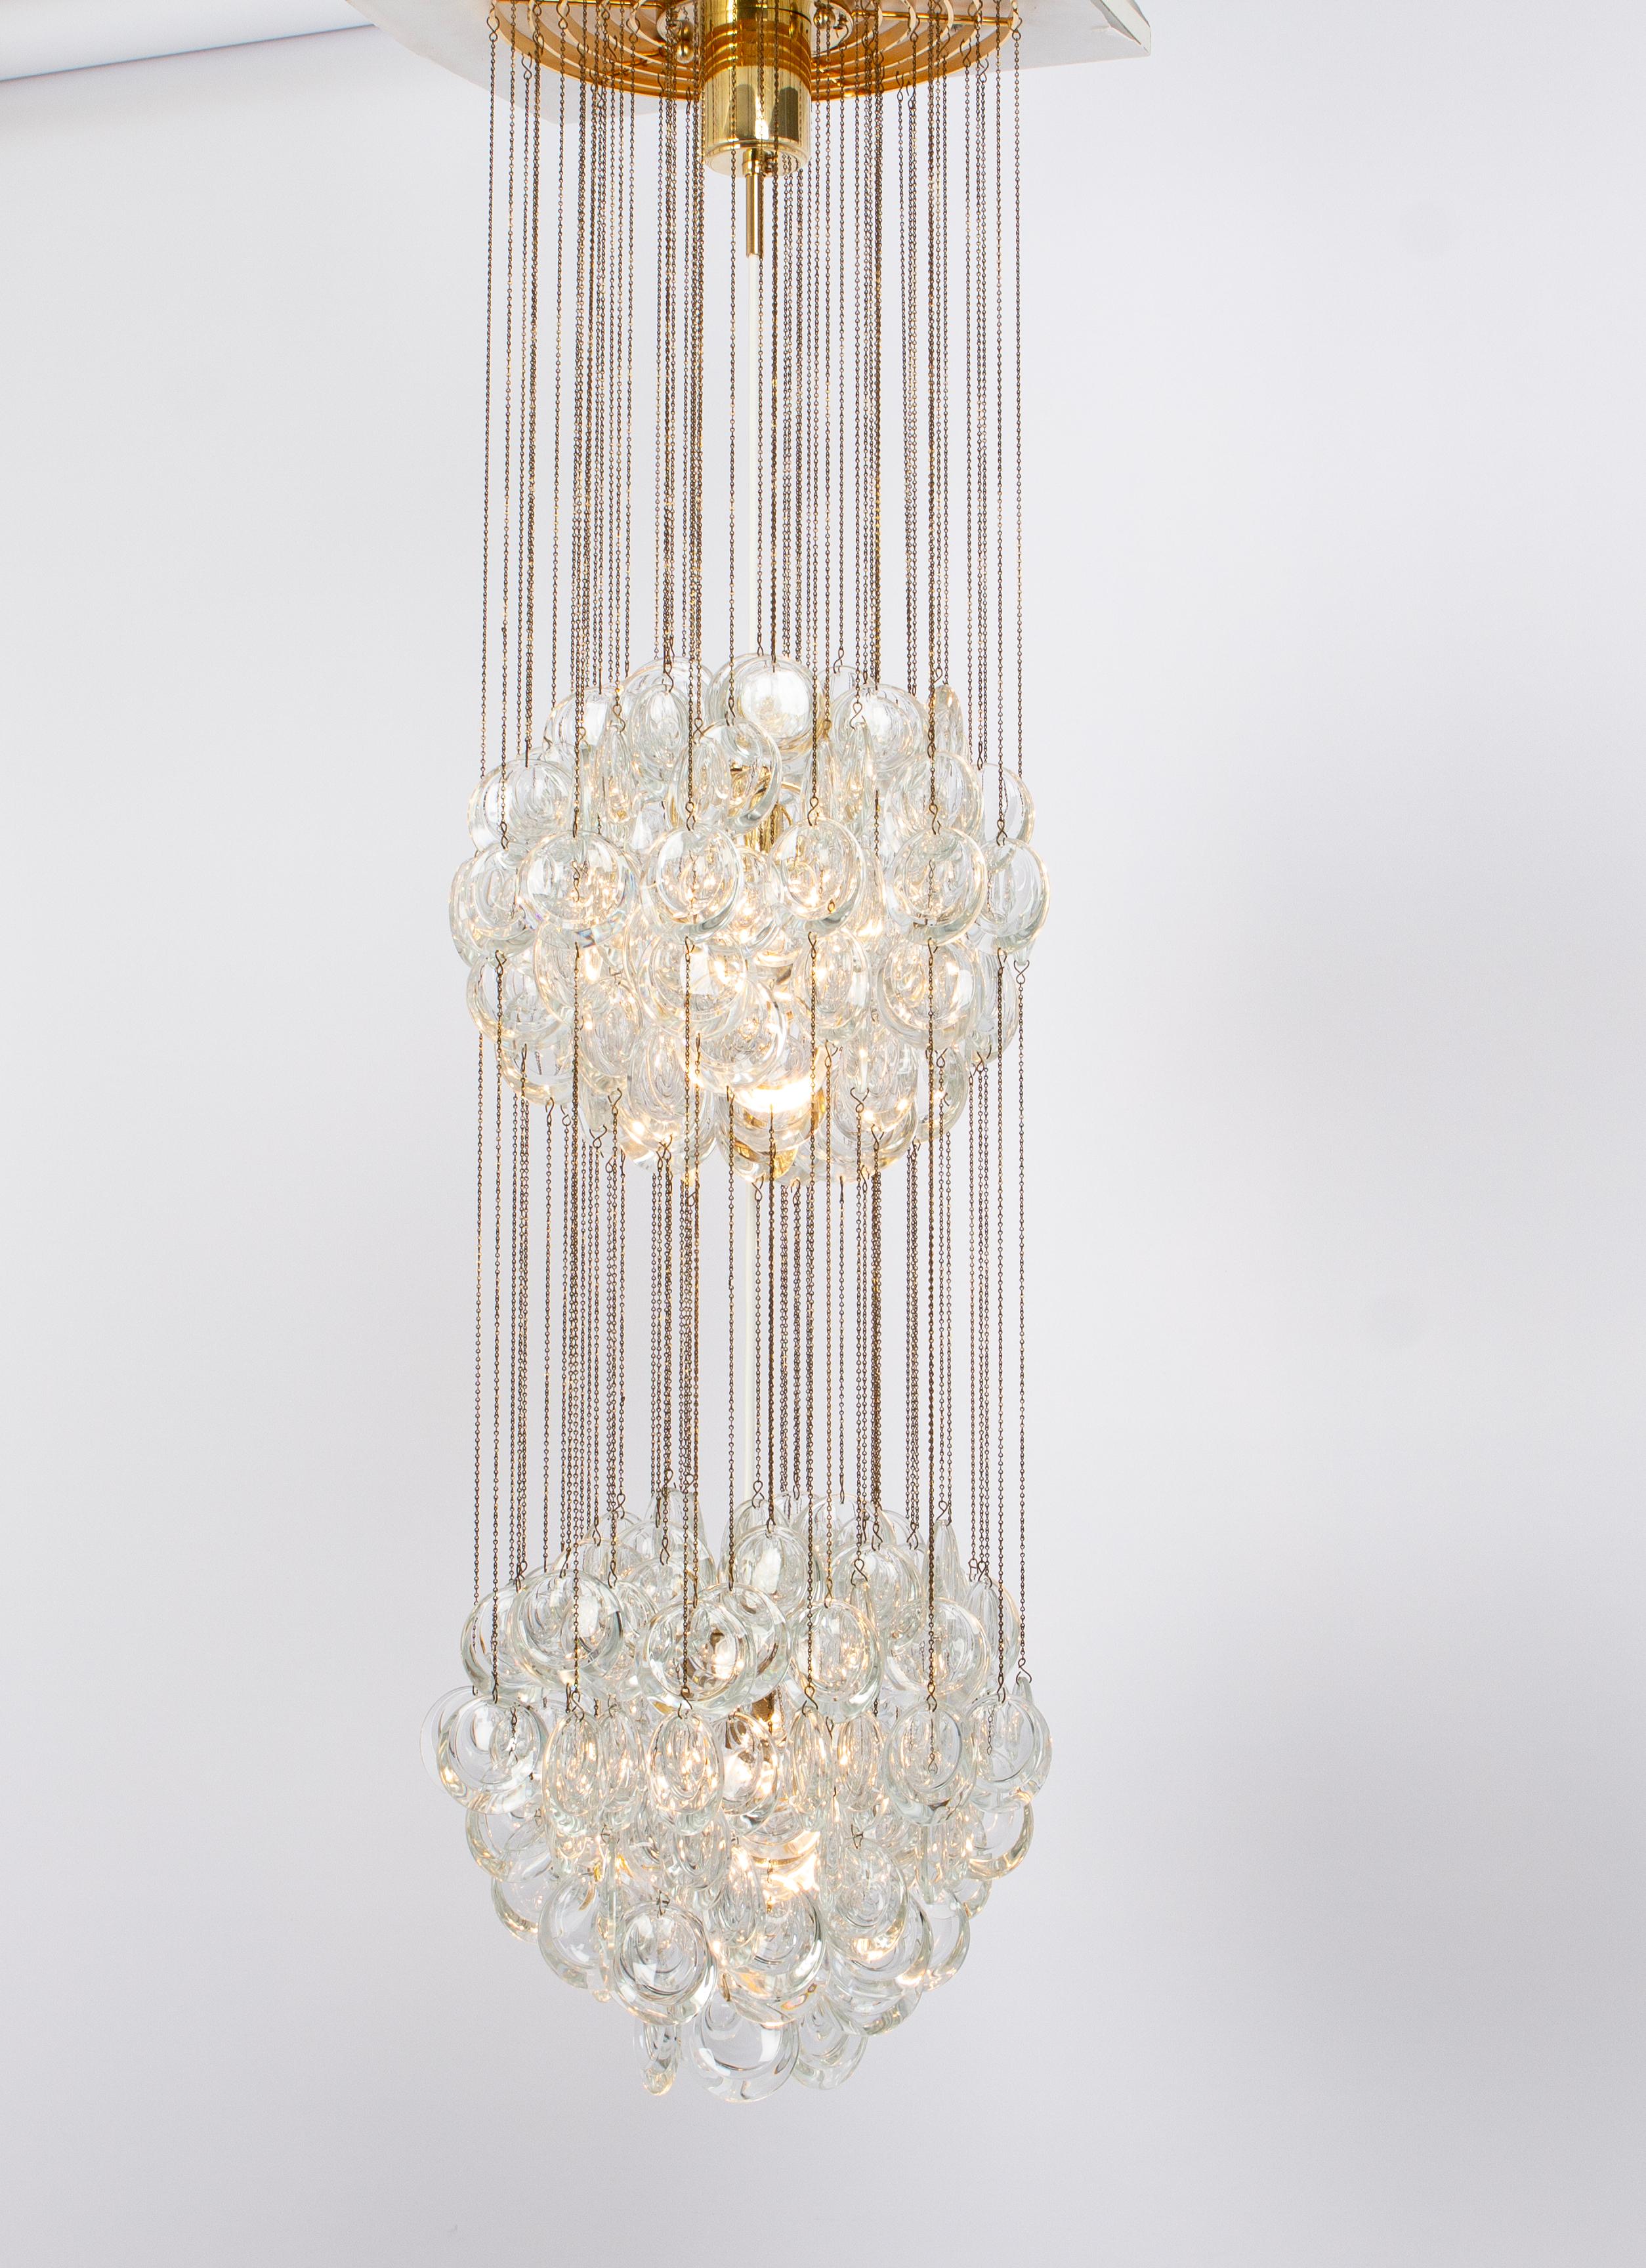 Delicate Gilt Brass Crystal Chandelier by Palwa, Sciolari Design, Germany, 1970s For Sale 1